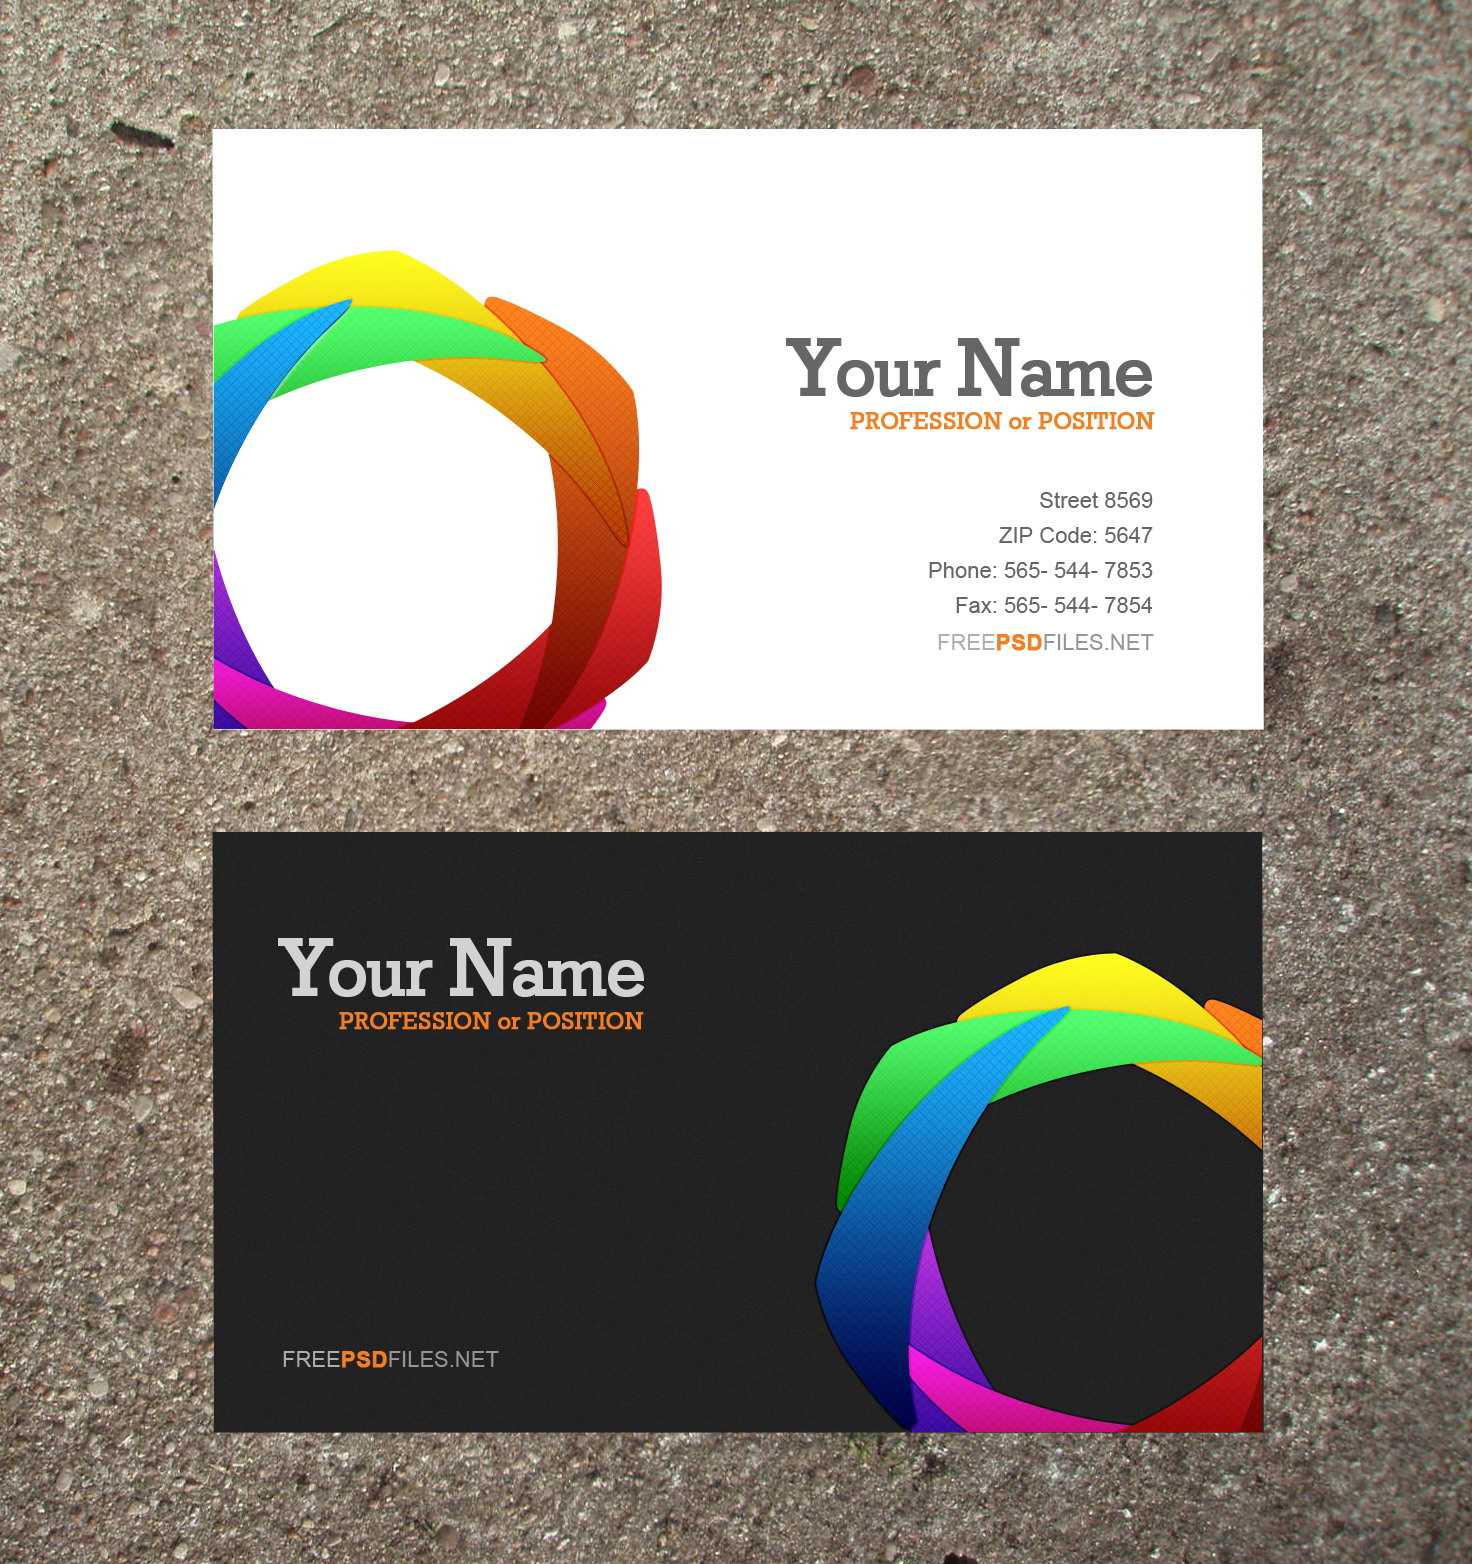 17 Business Cards Templates Free Downloads Images – Free In Blank Business Card Template Download